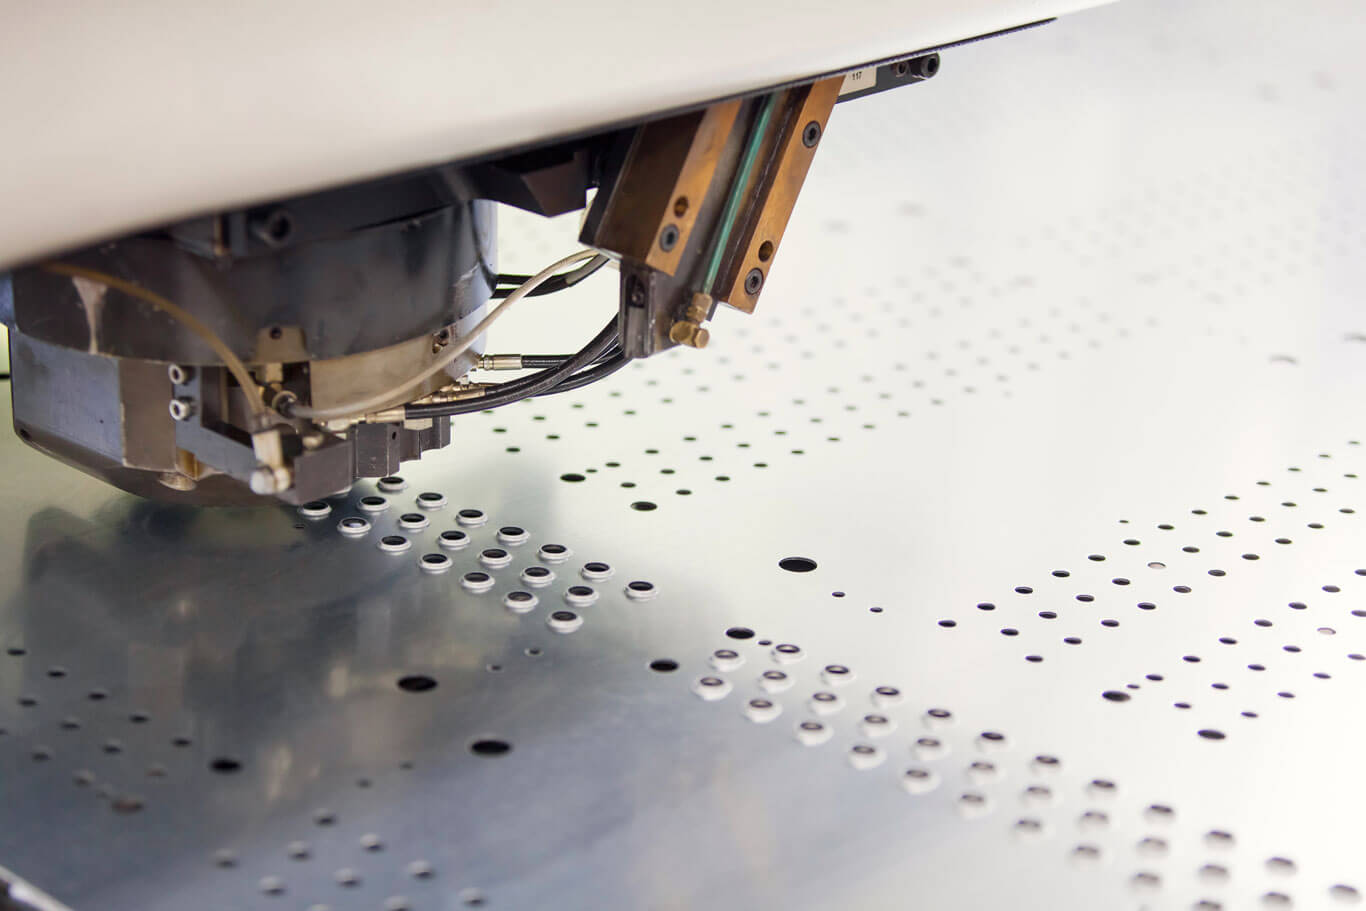 Metal-Core Technologies offers expertise in precision metal stamping, as represented by this image.